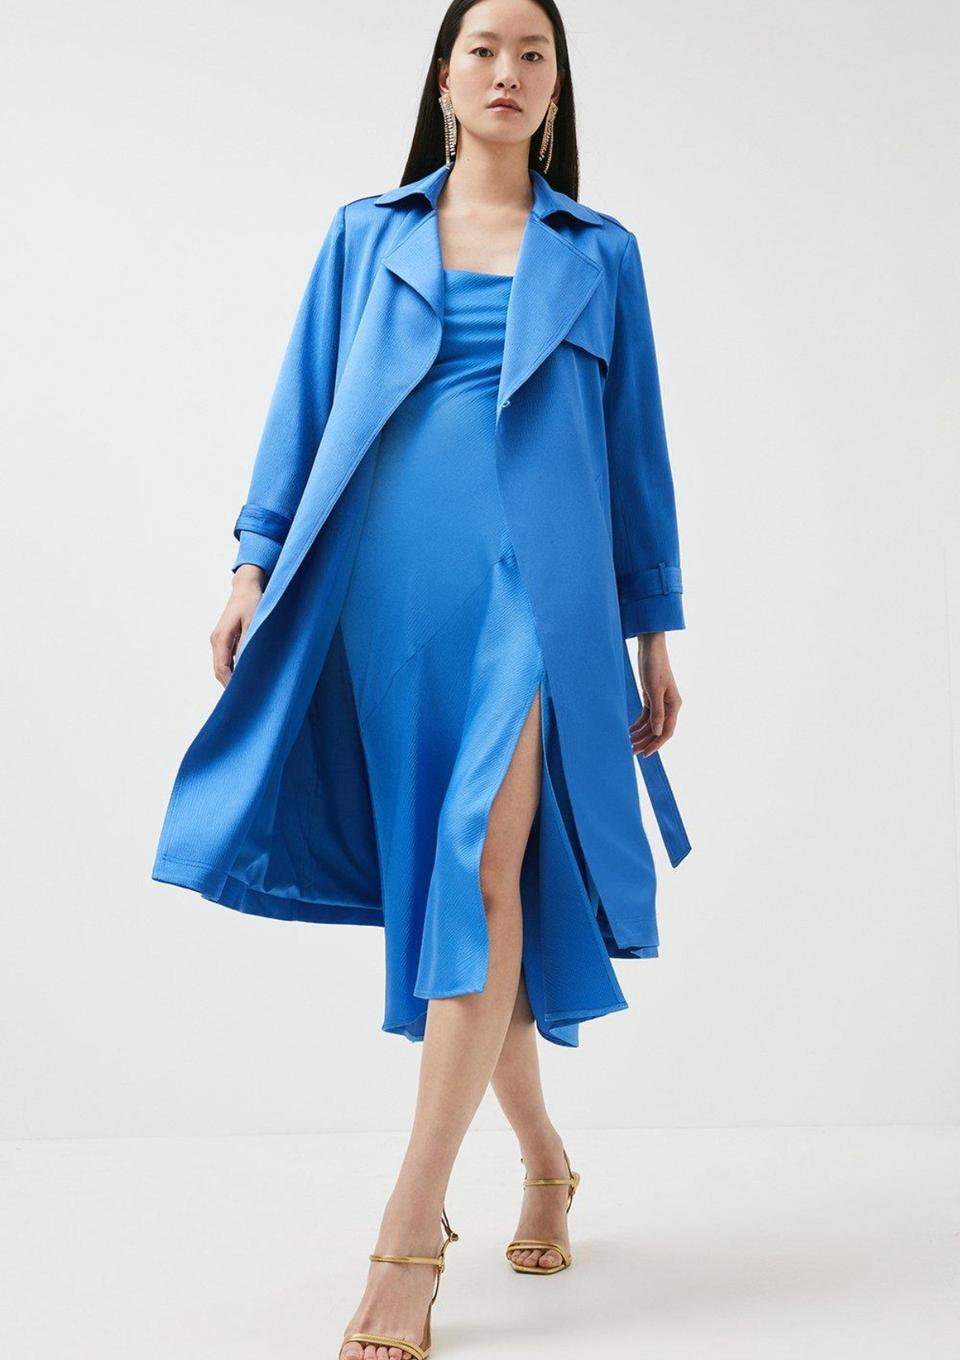 21 of the Best Coats & Coat Dresses for Weddings - hitched.co.uk ...